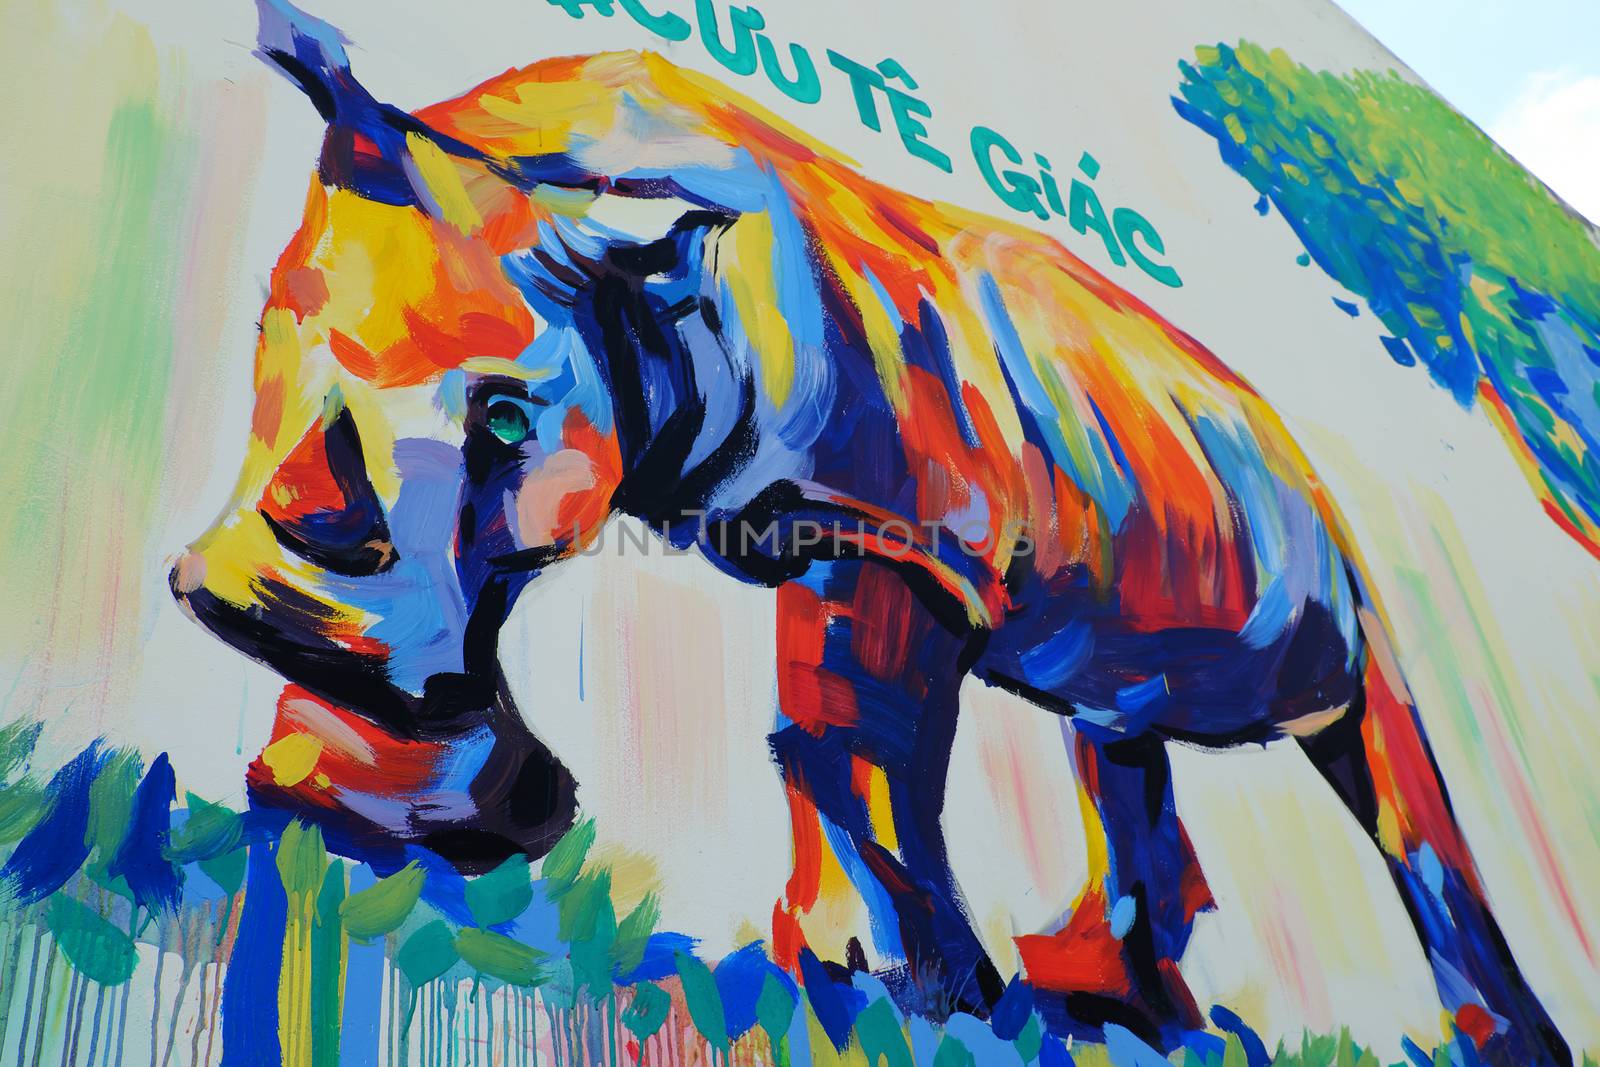 HO CHI MINH CITY, VIET NAM- MARCH 23, 2017: Propaganda campaign to Vietnamese don't use Rhino horn by graffiti art, Rhinoceros painting on wall, message people protect animal, meaningful street art